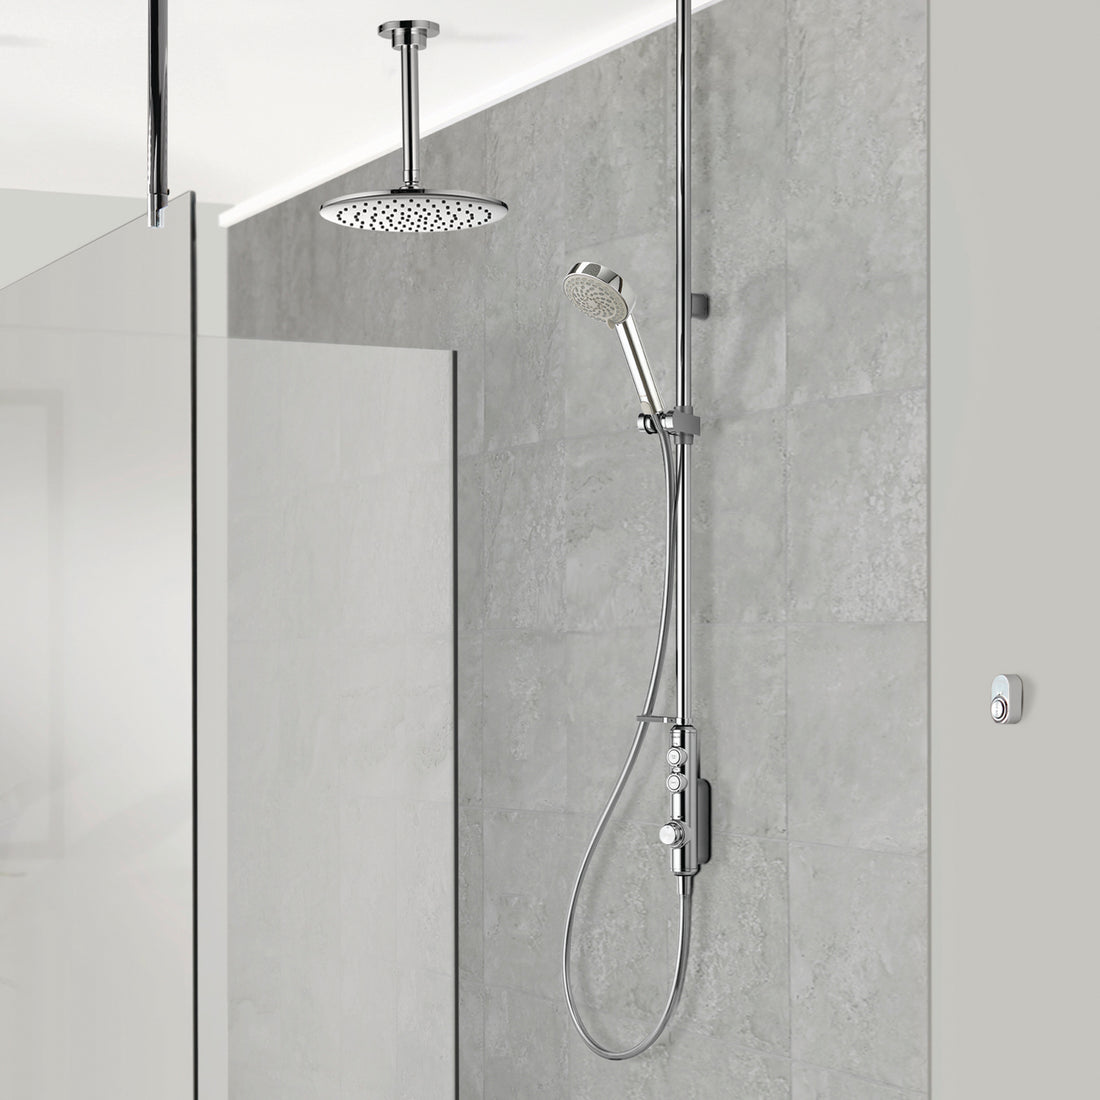 Aqualisa Isystem Smart Shower - Exposed With Adjustable &amp; Ceiling Fixed Head against white wall panel ISD.A1.EV.DVFC.21